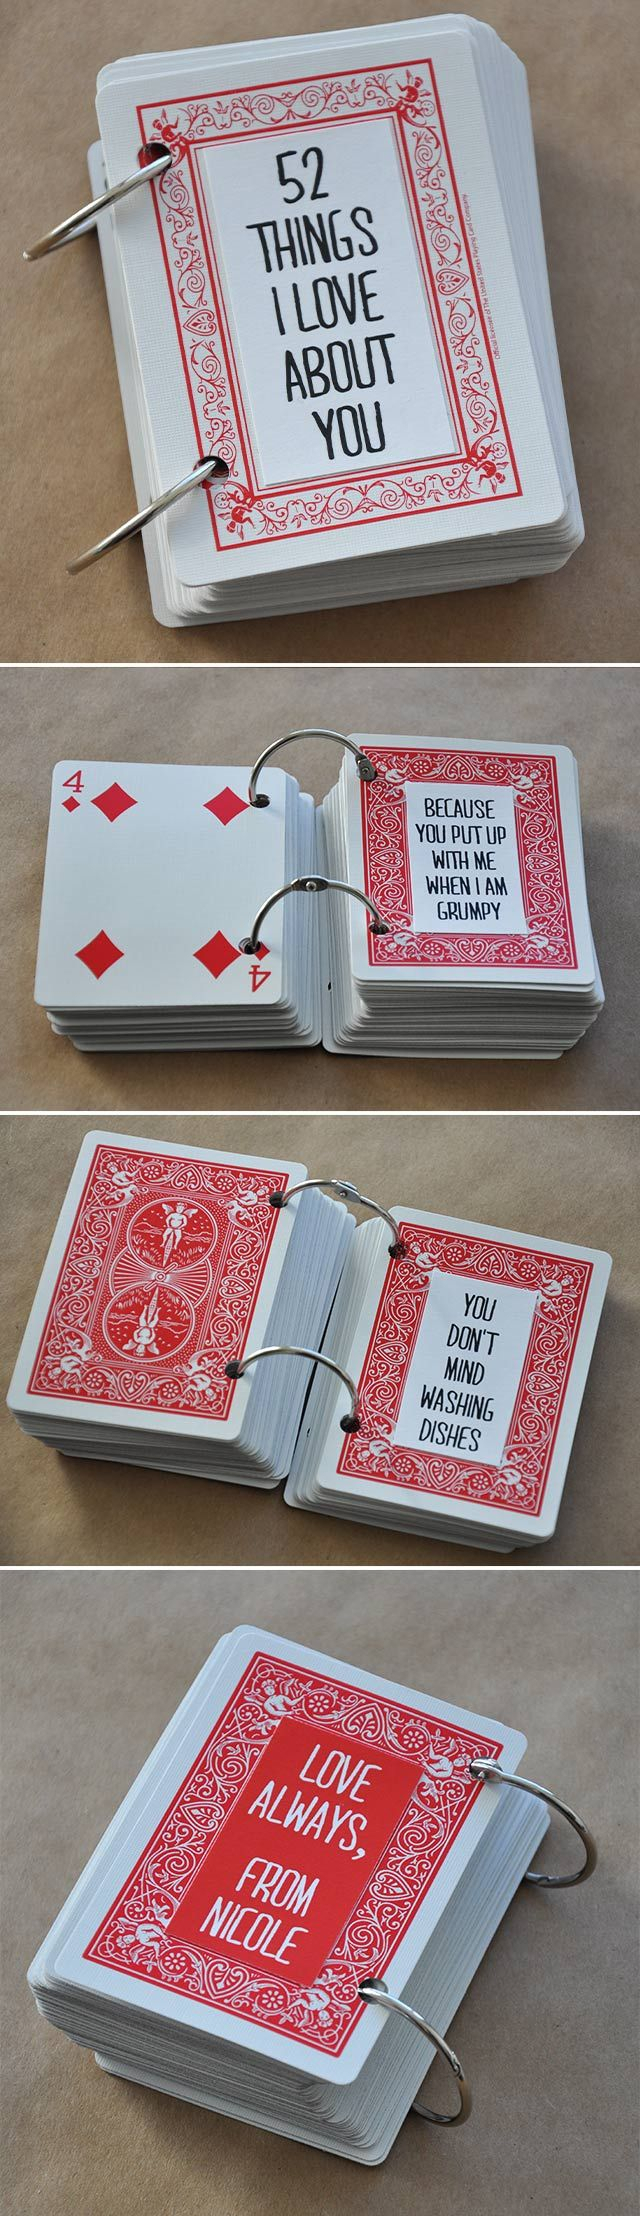 Hanna Megan (Hanna Garcia77) On Pinterest Throughout 52 Things I Love About You Deck Of Cards Template